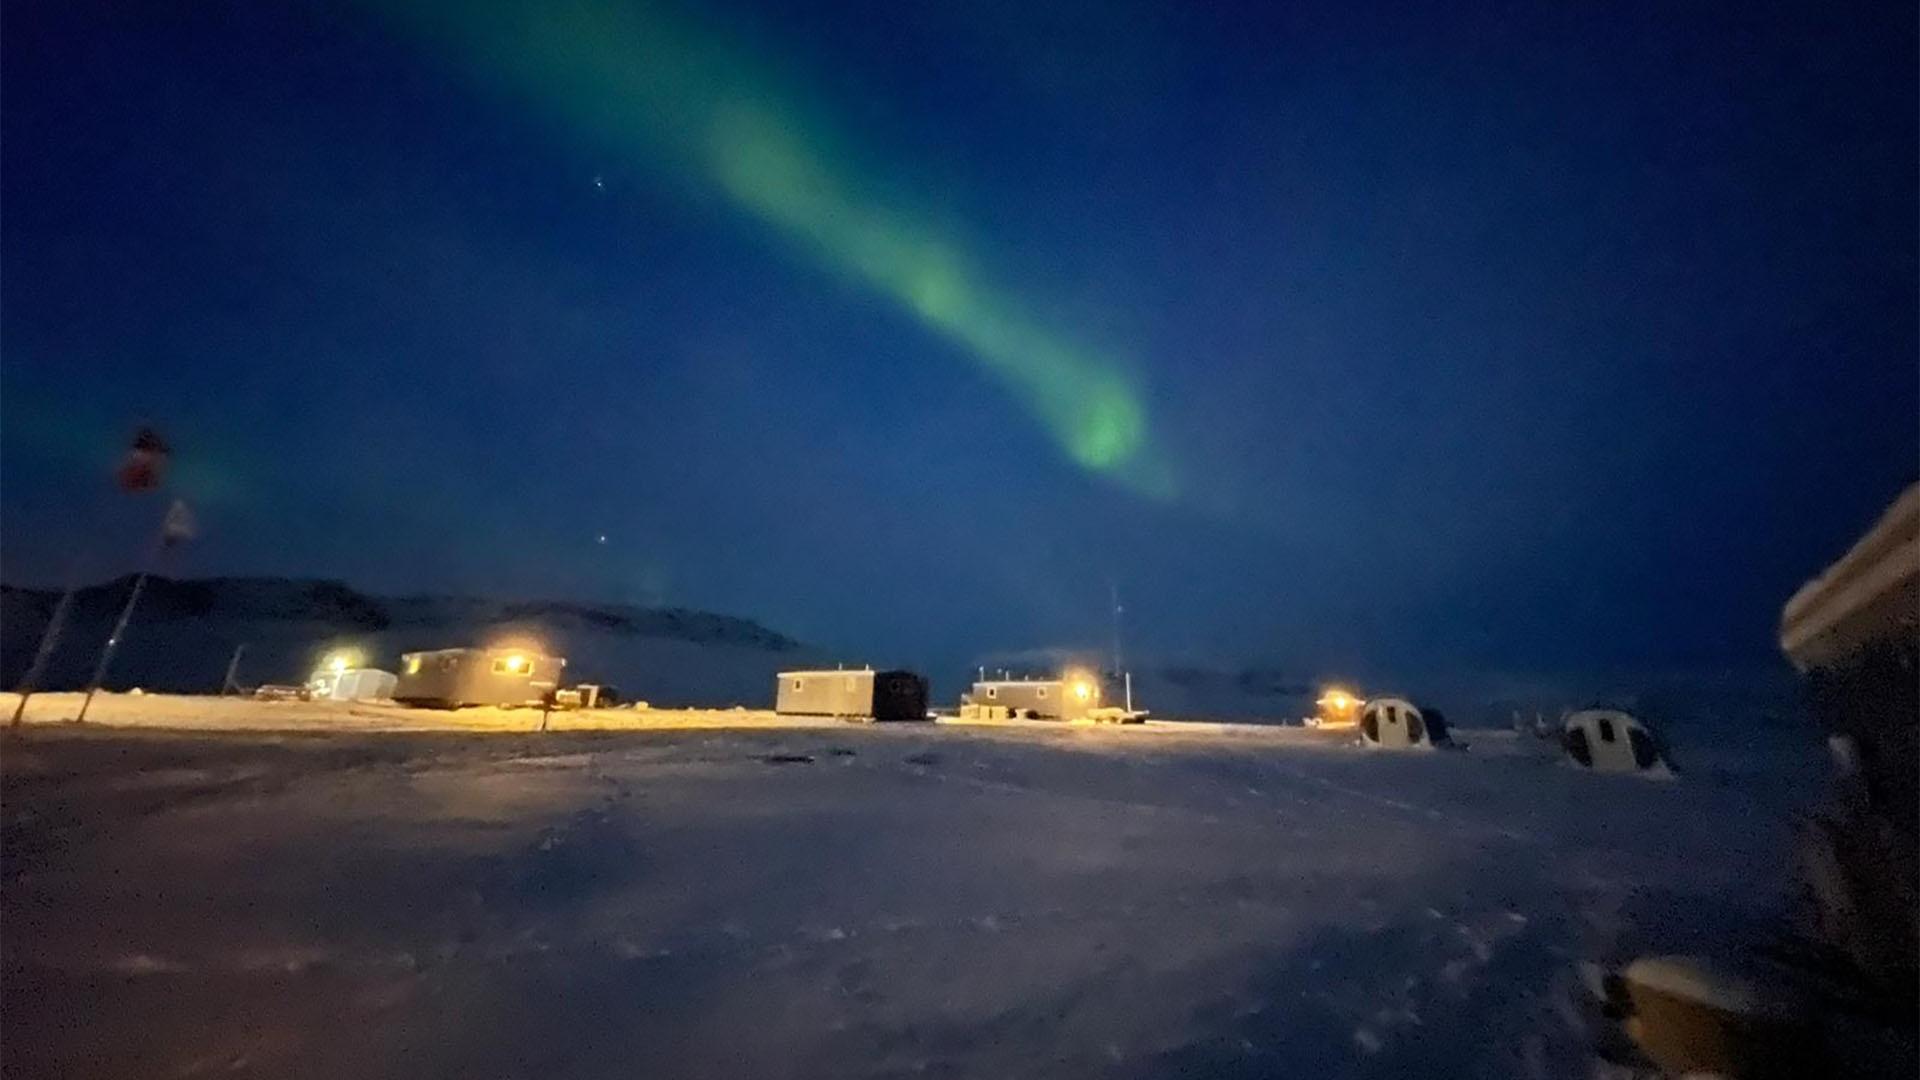 An image of Aurora Borealis over Zackenberg Research Station.